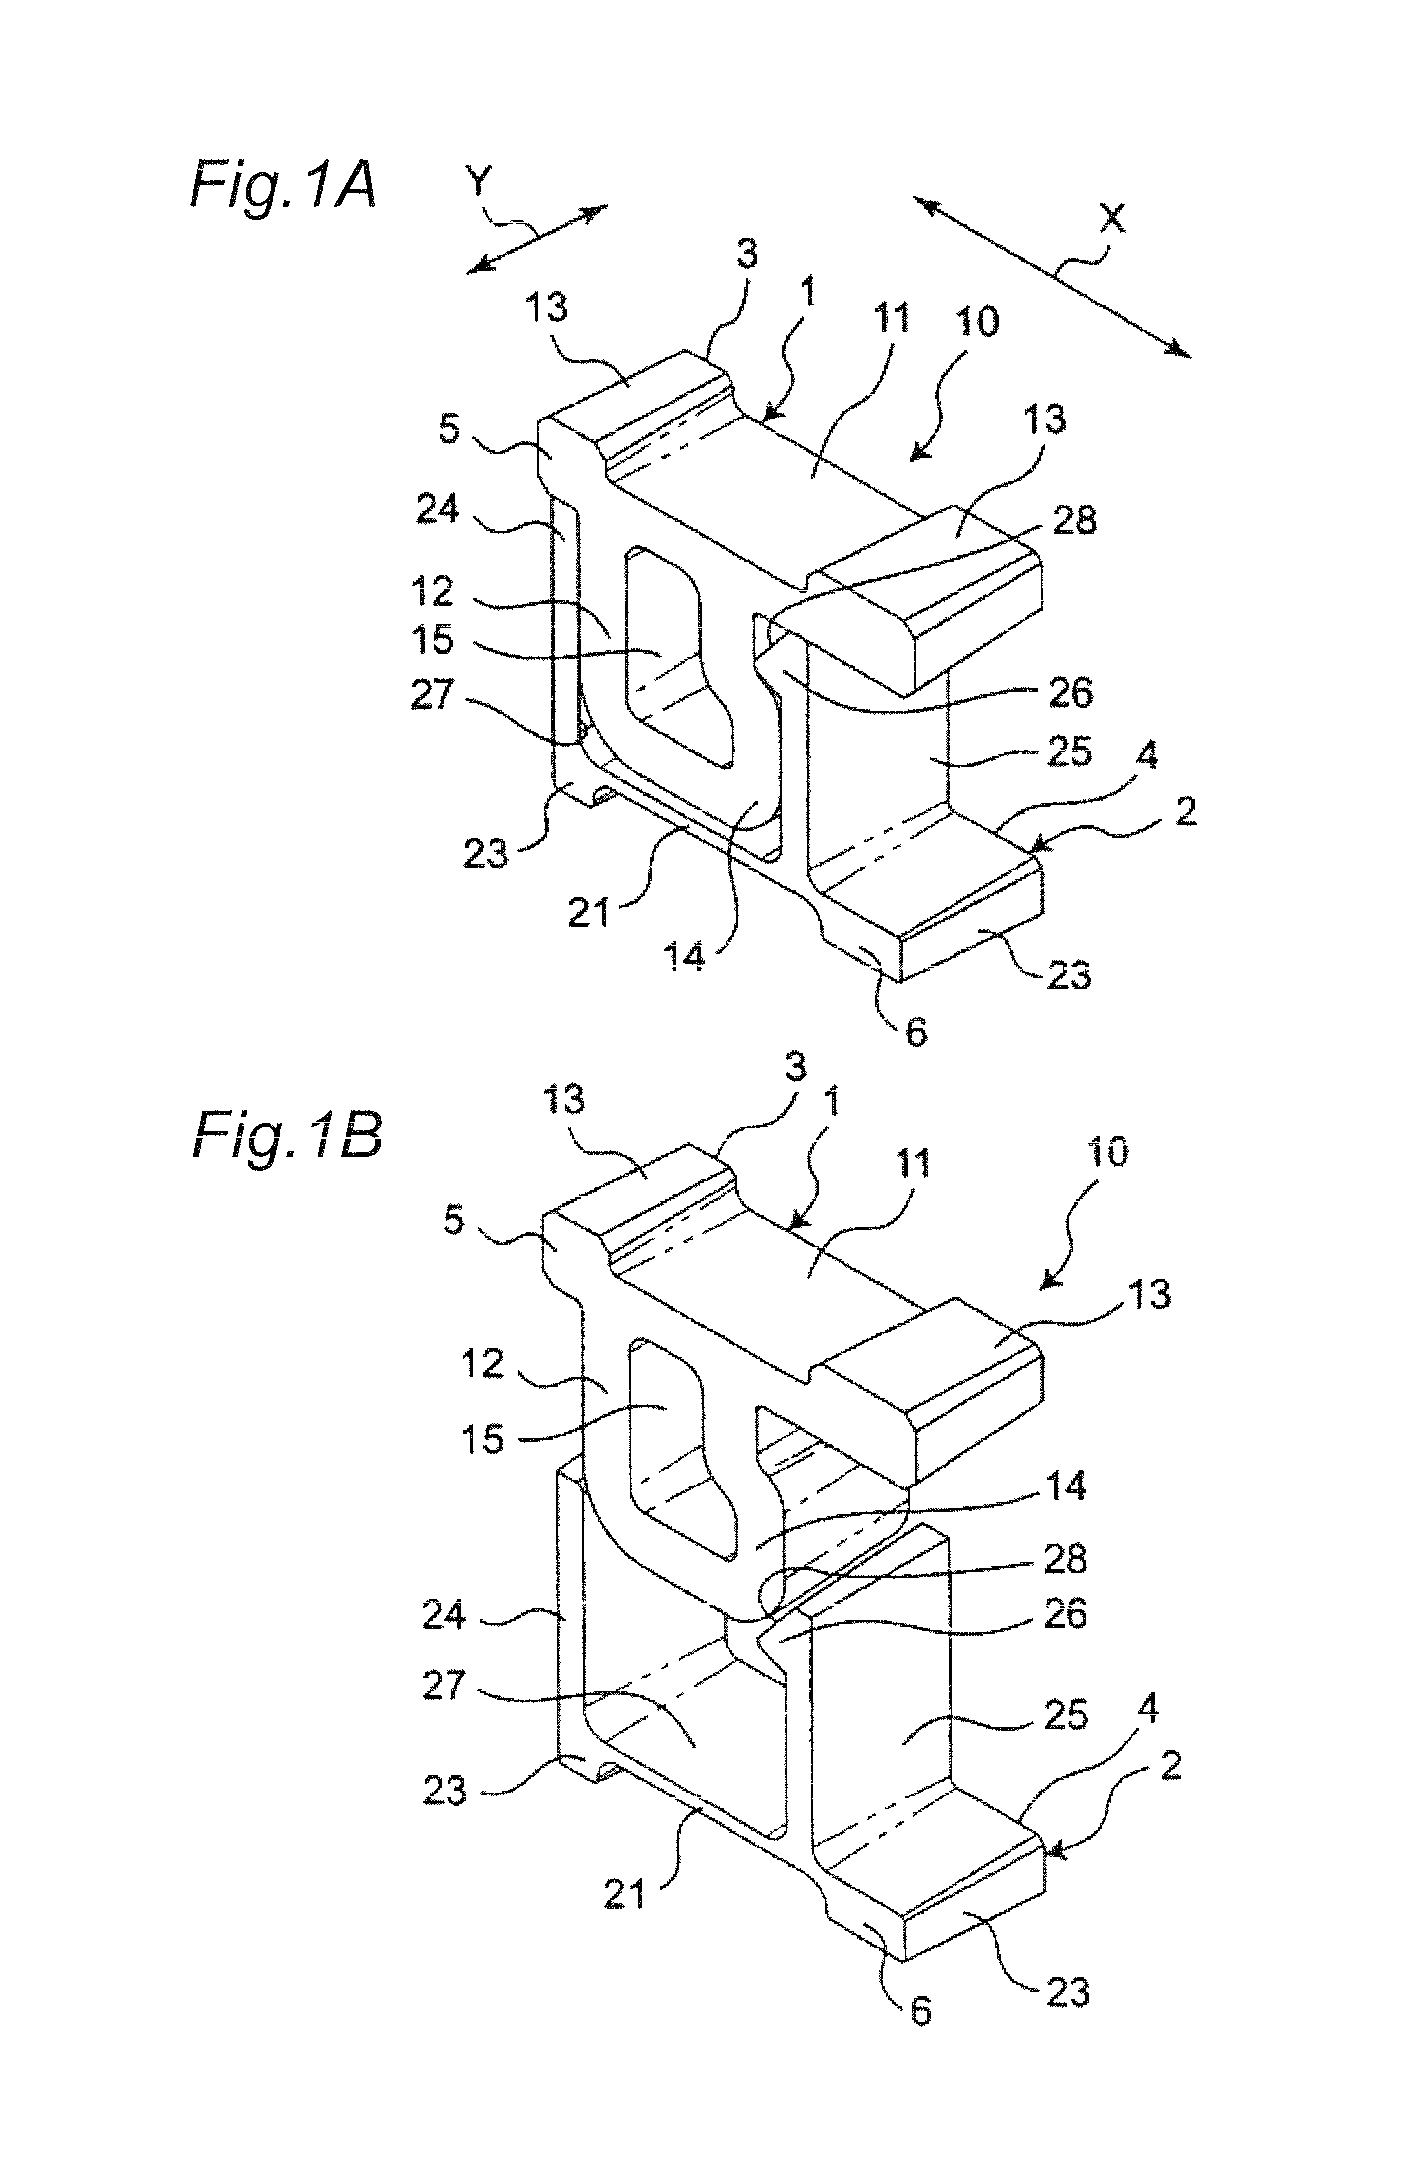 Connecting mechanism having two contacts with contact surfaces inclined in a direction perpendicular to their mating direction